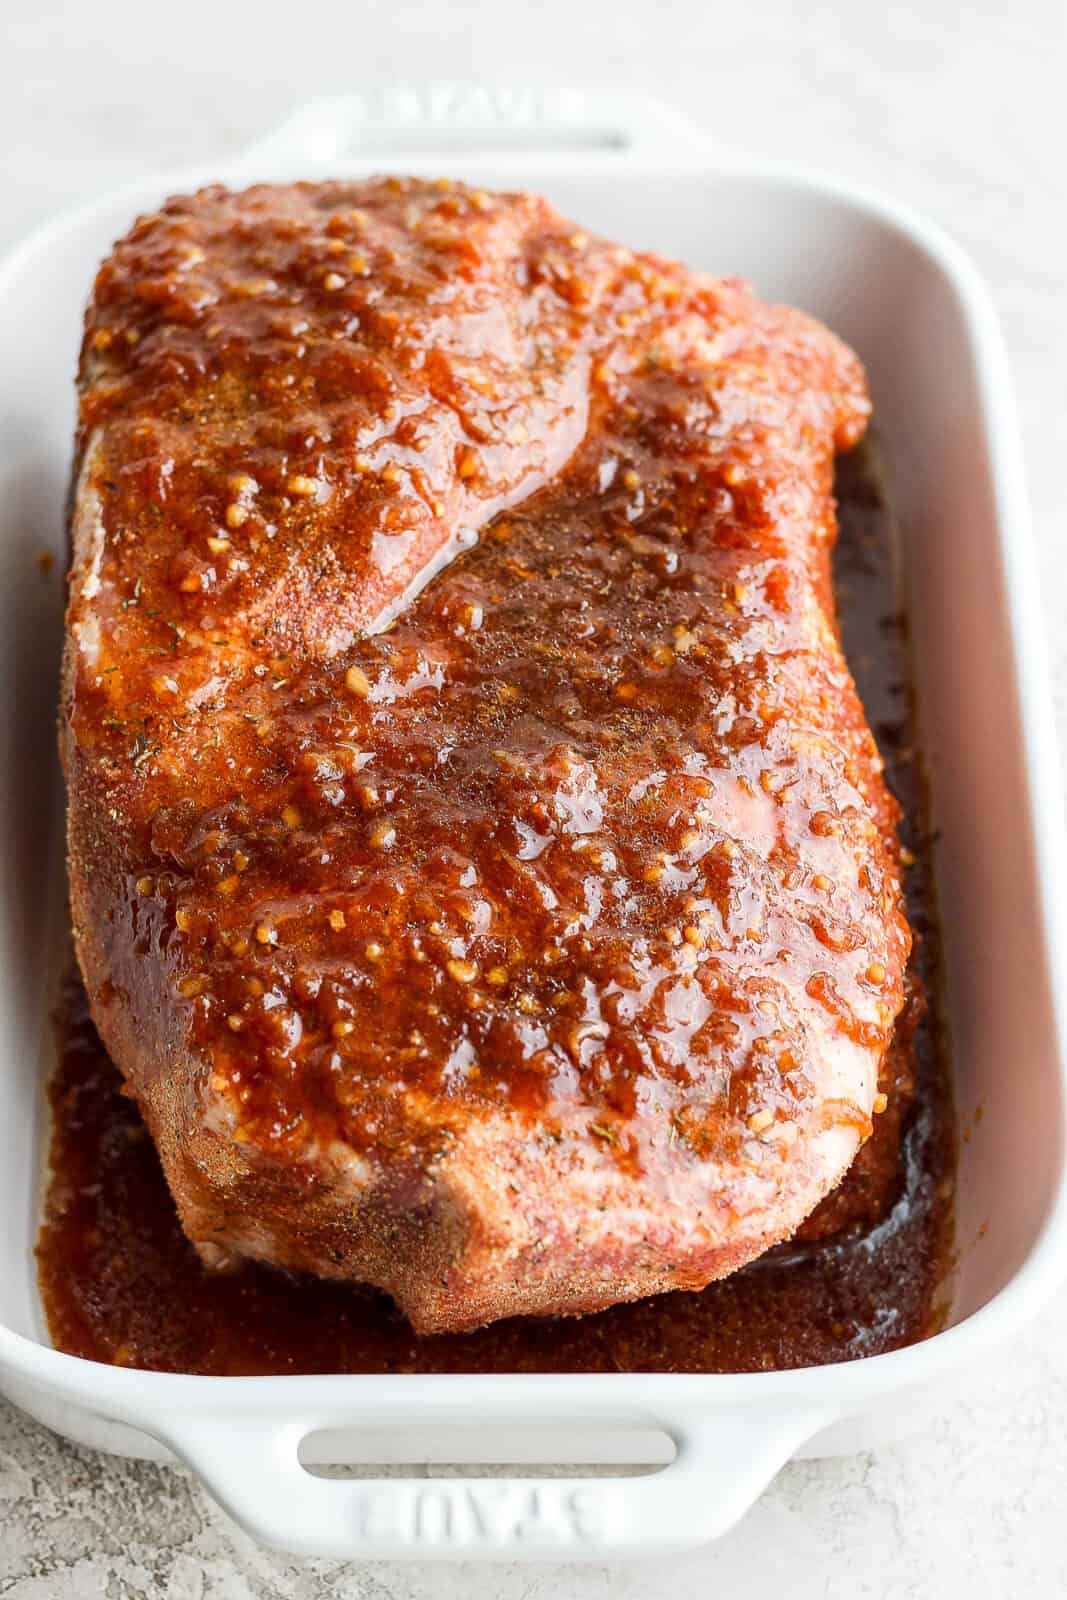 Marinade over a pork roast in a shallow dish.